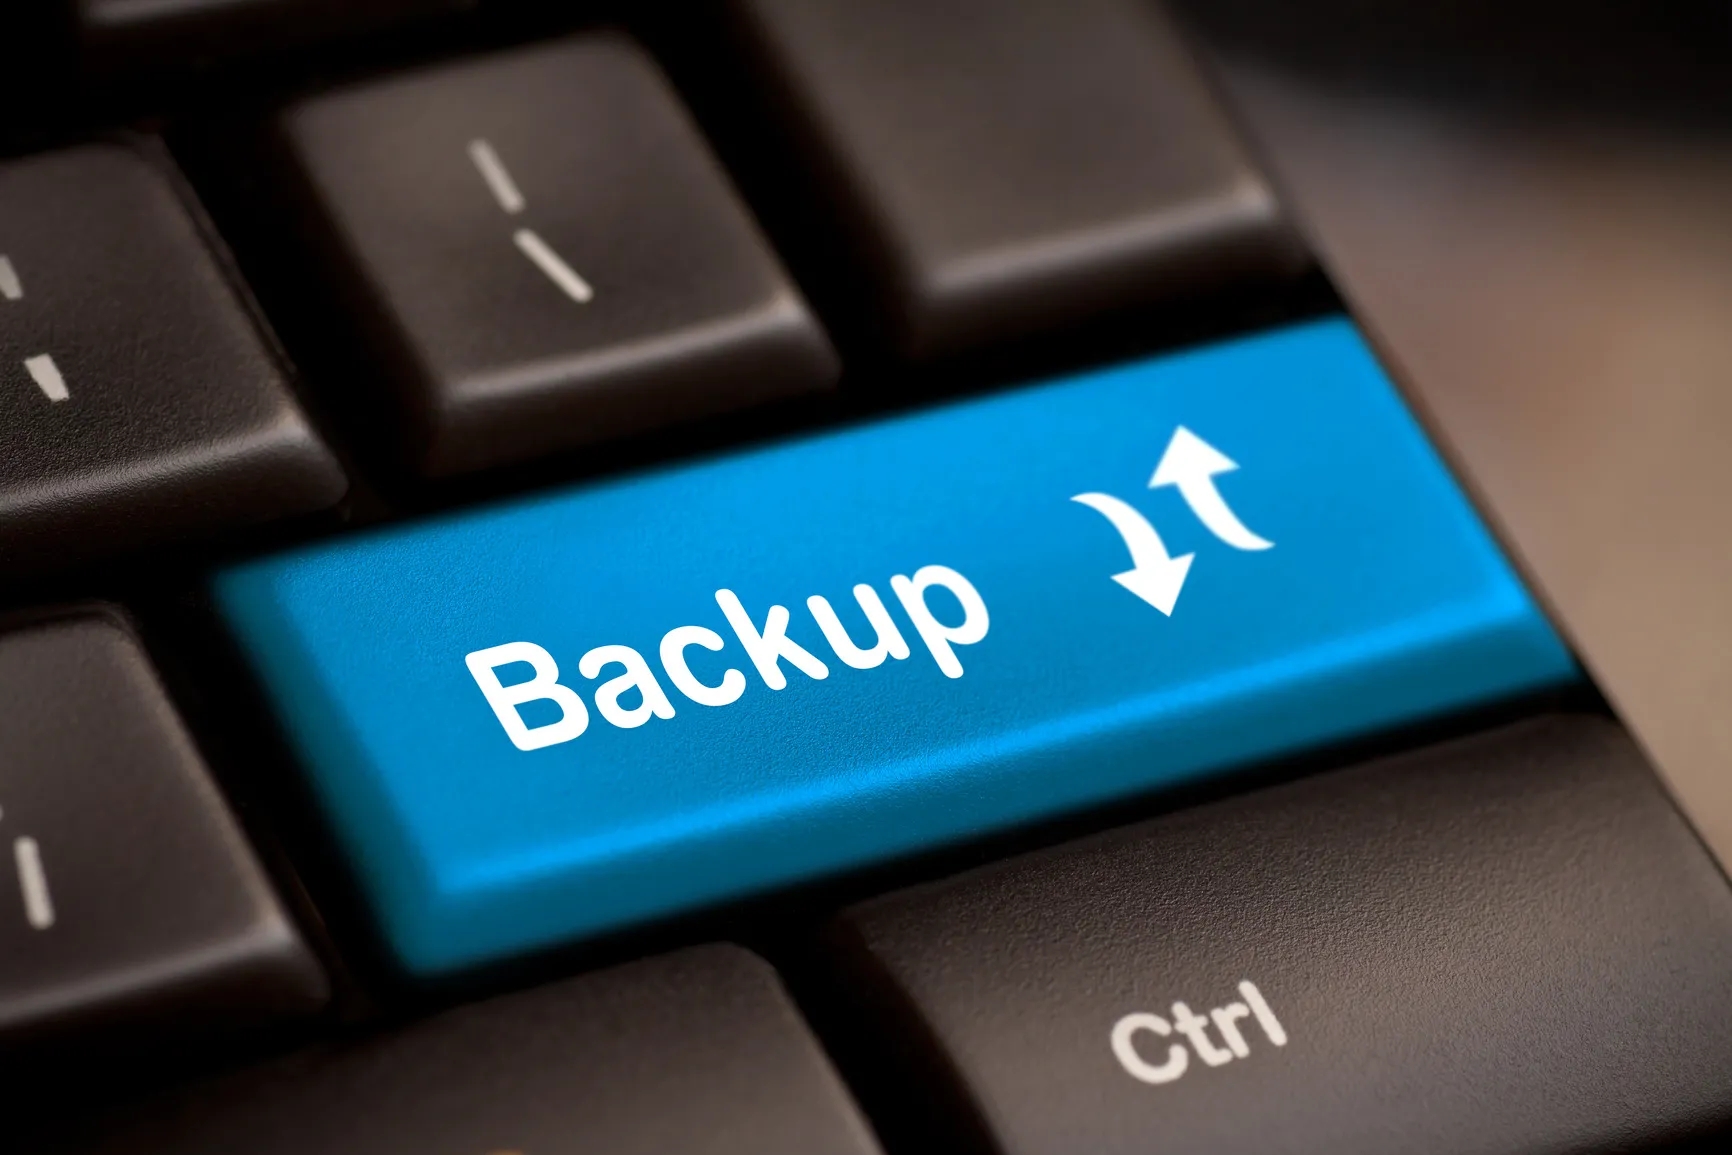 for mac instal Hasleo Backup Suite 3.8